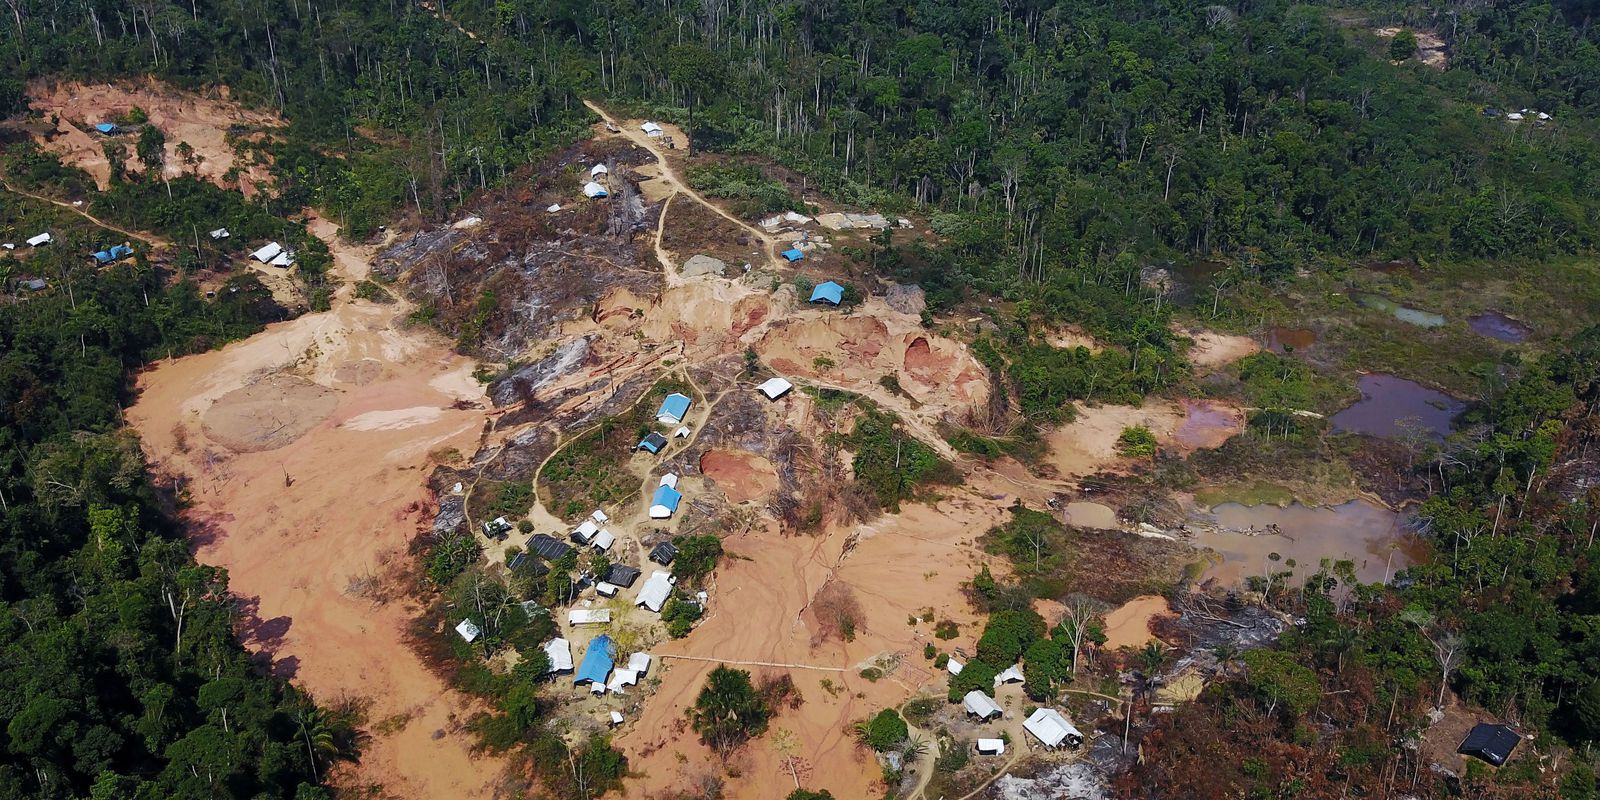 Amazon: illegal mining in indigenous lands rose 1,217% in 35 years